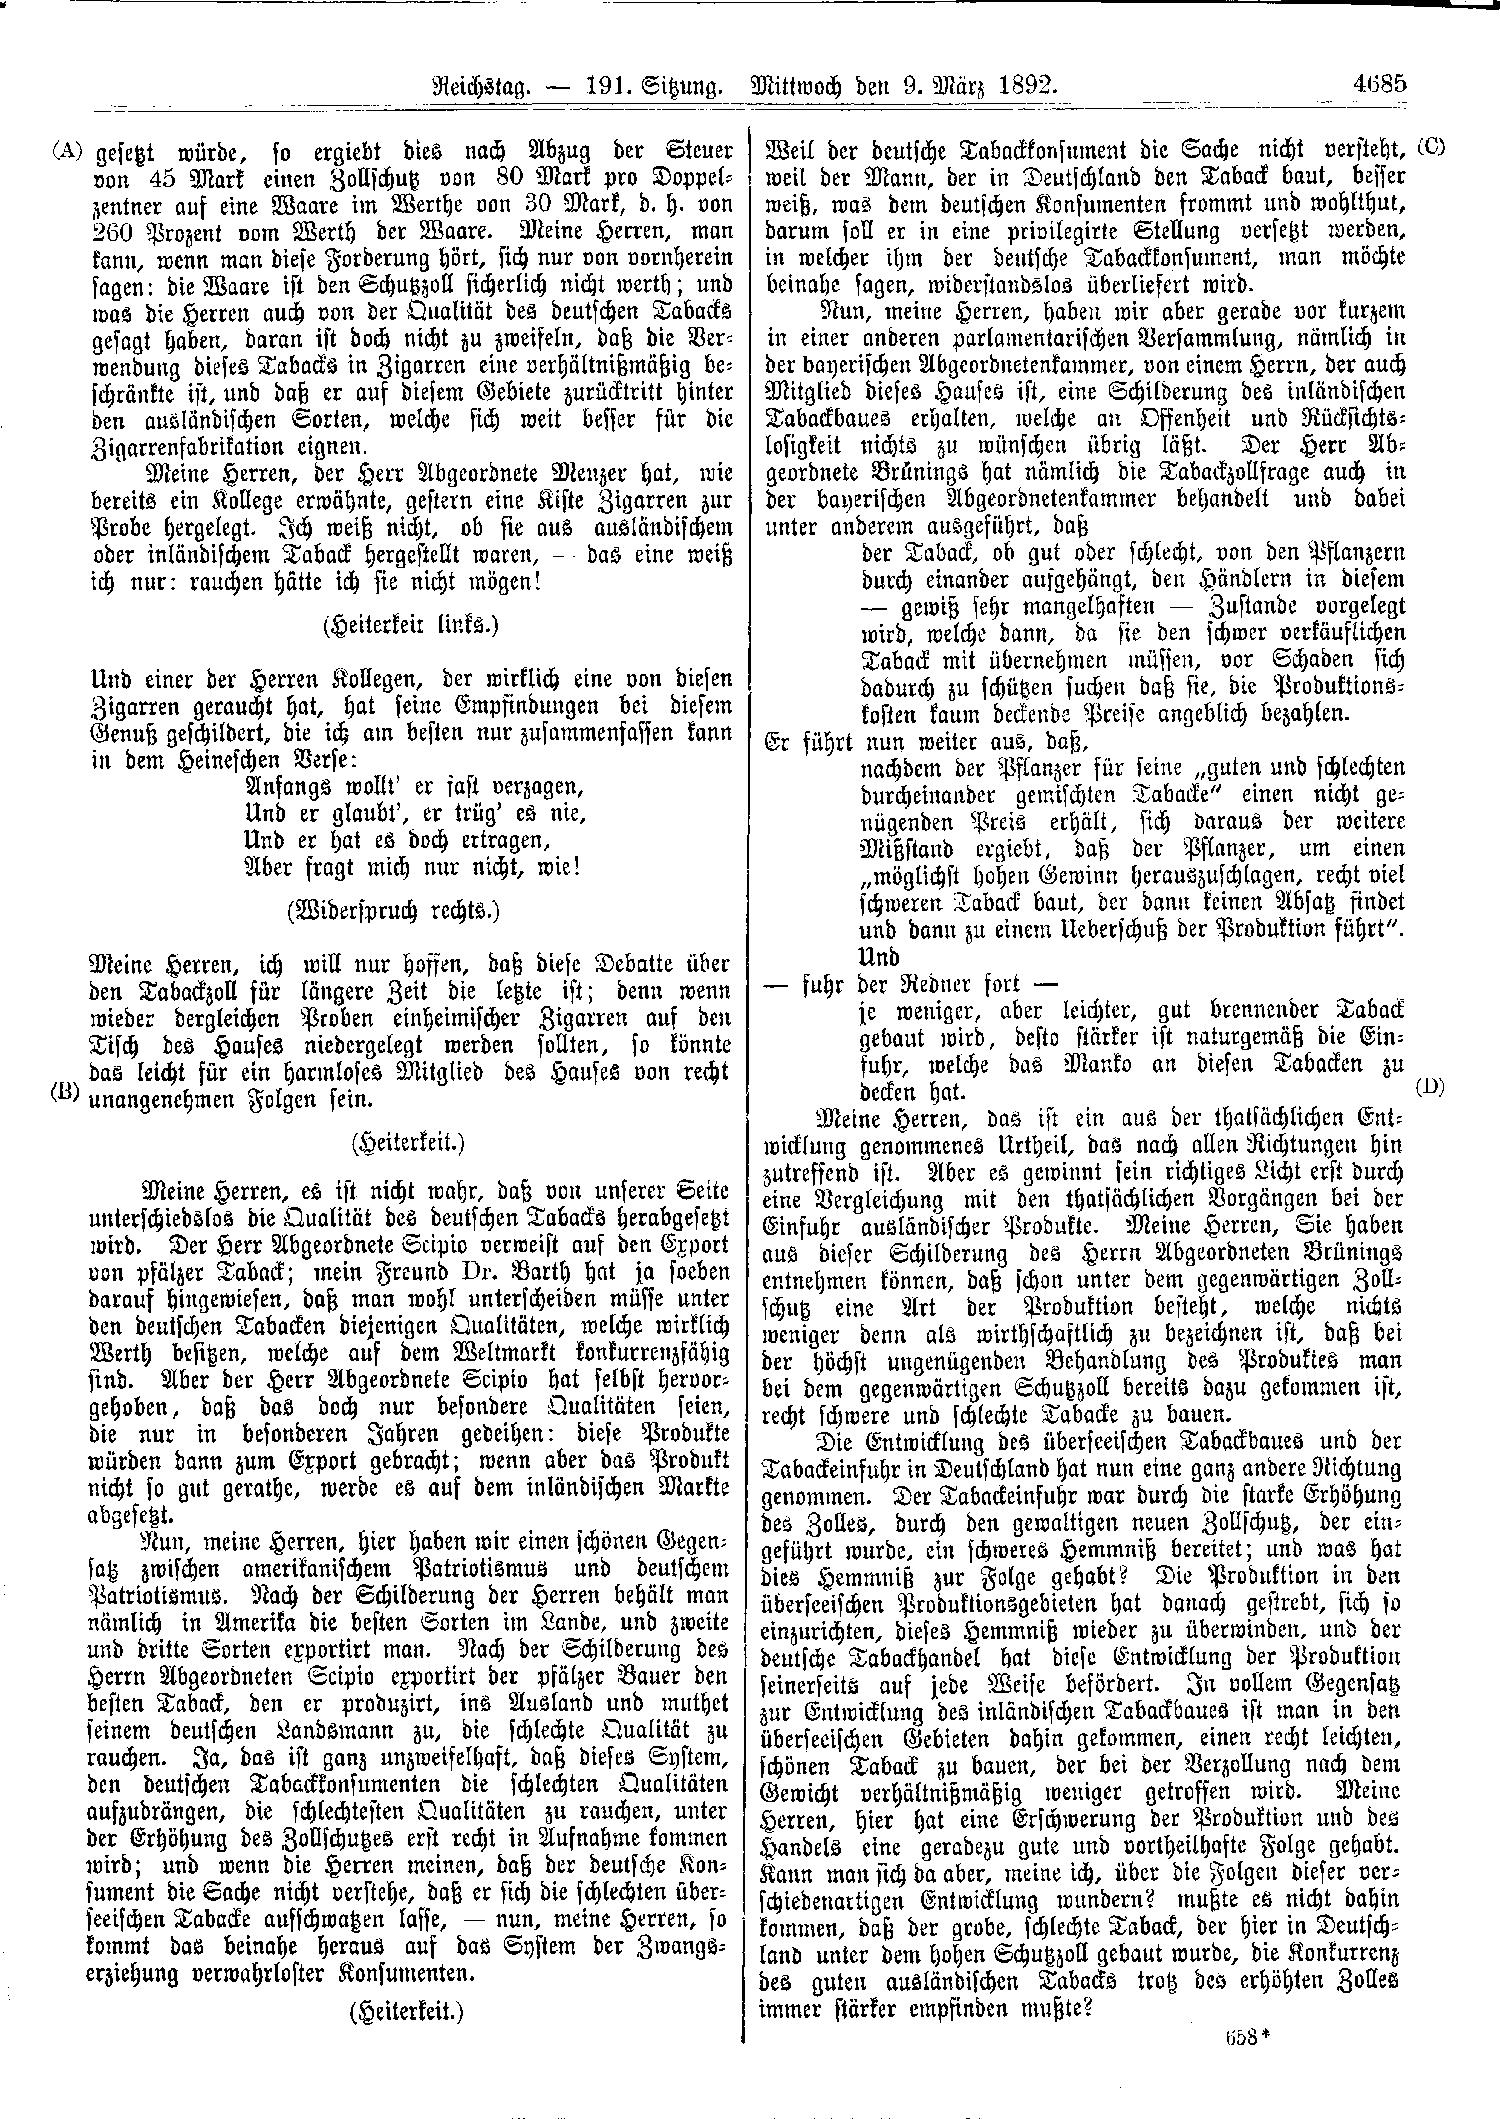 Scan of page 4685